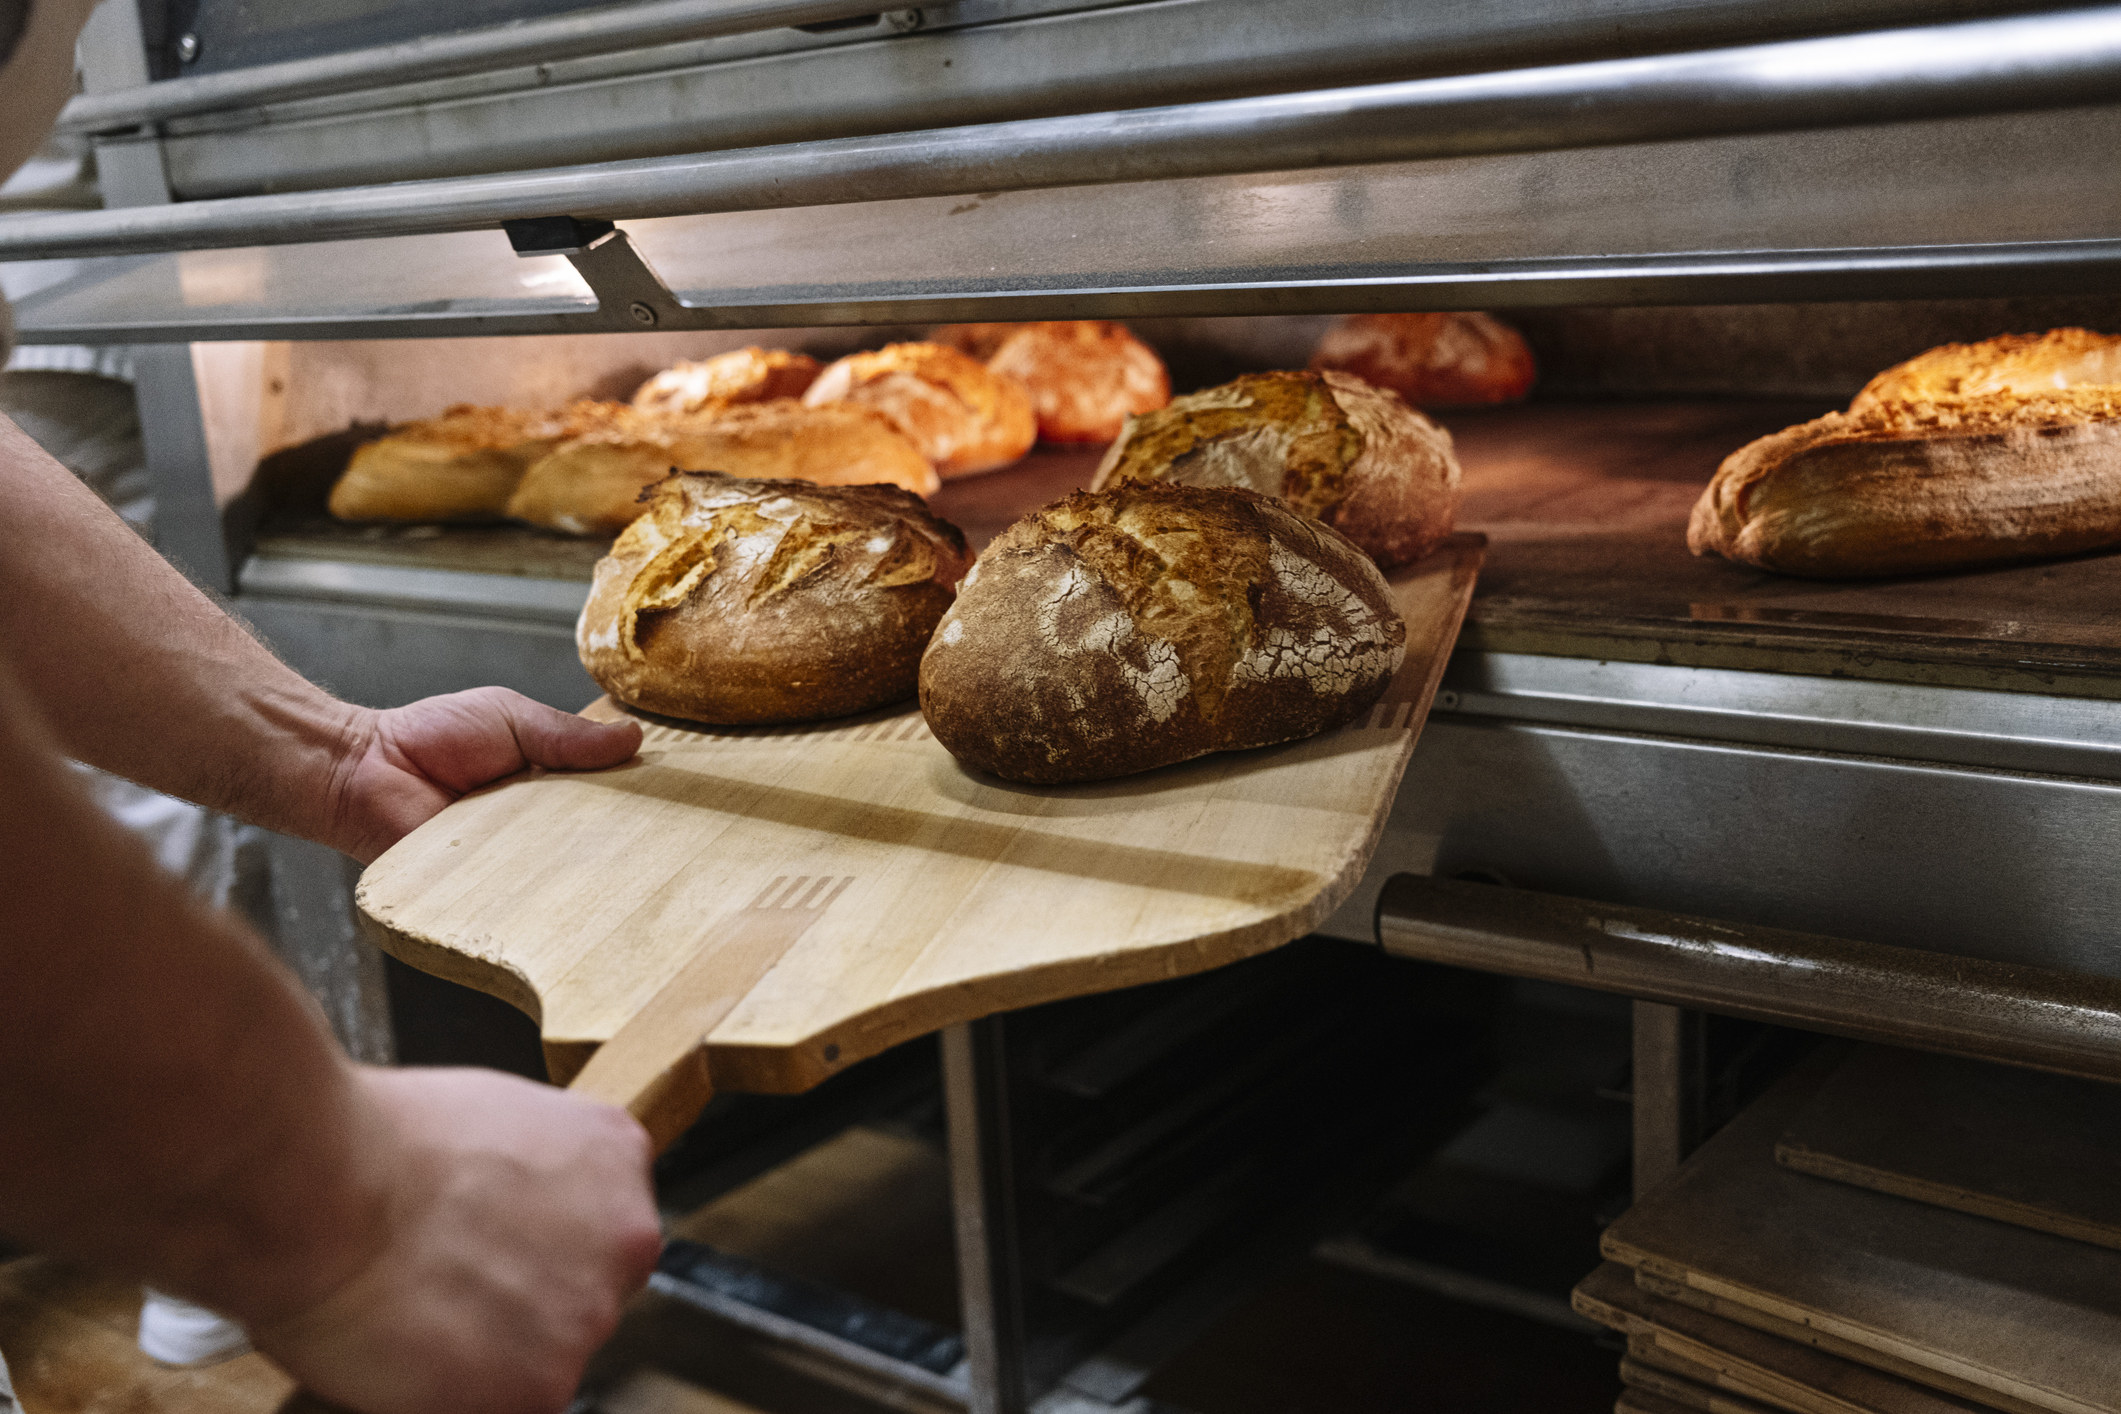 Chef removing baked bread from oven at bakery.